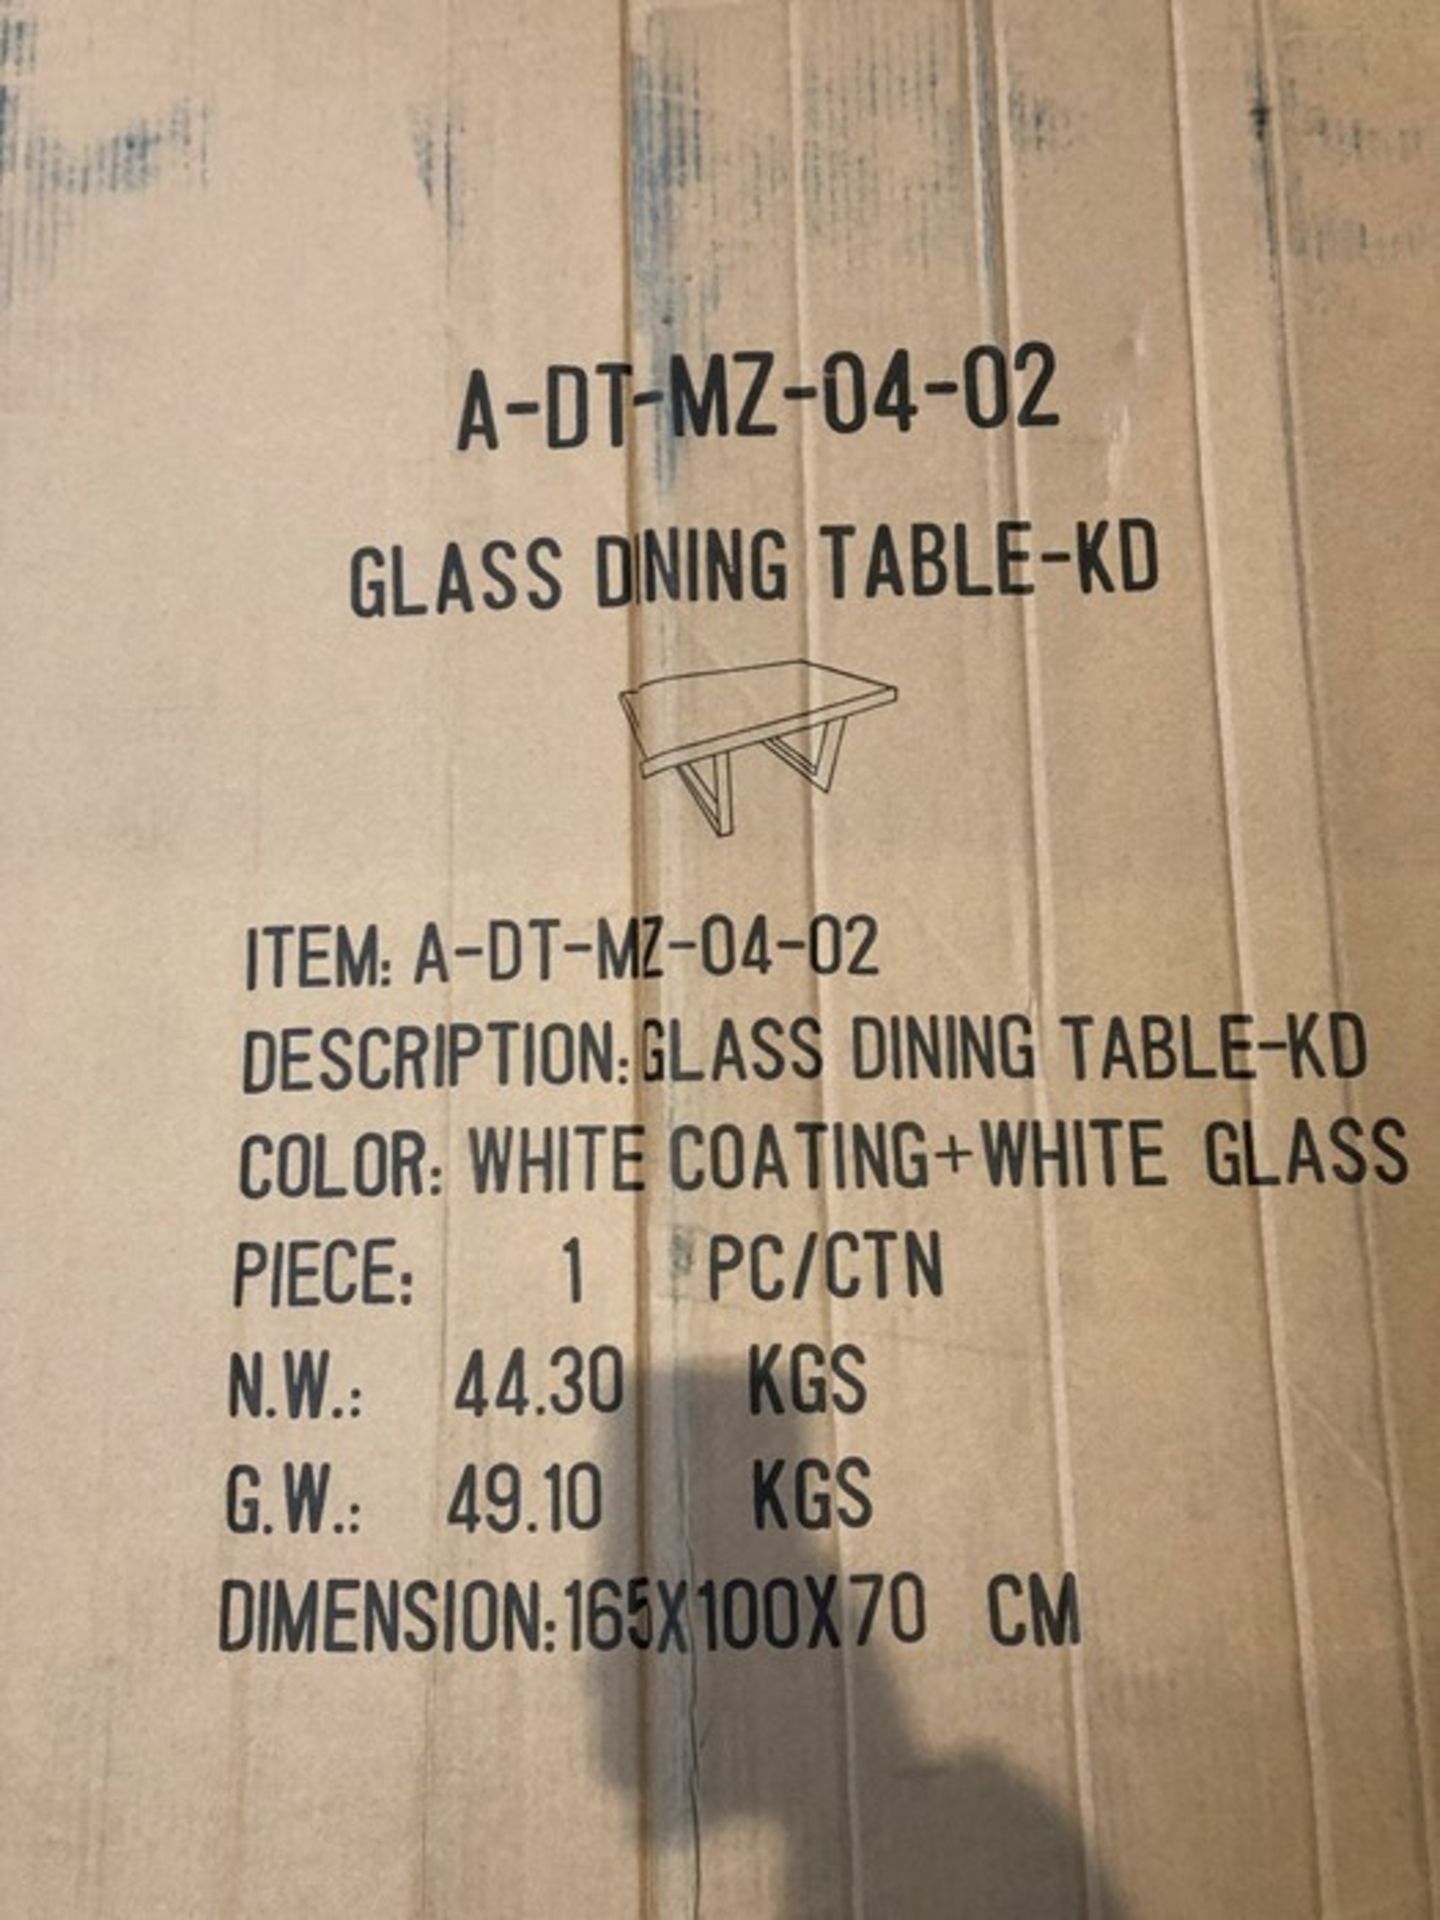 1 BOXED GLASS DINING TABLE-KD IN WHITE COATING AND WHITE GLASS (PUBLIC VIEWING AVAILABLE)